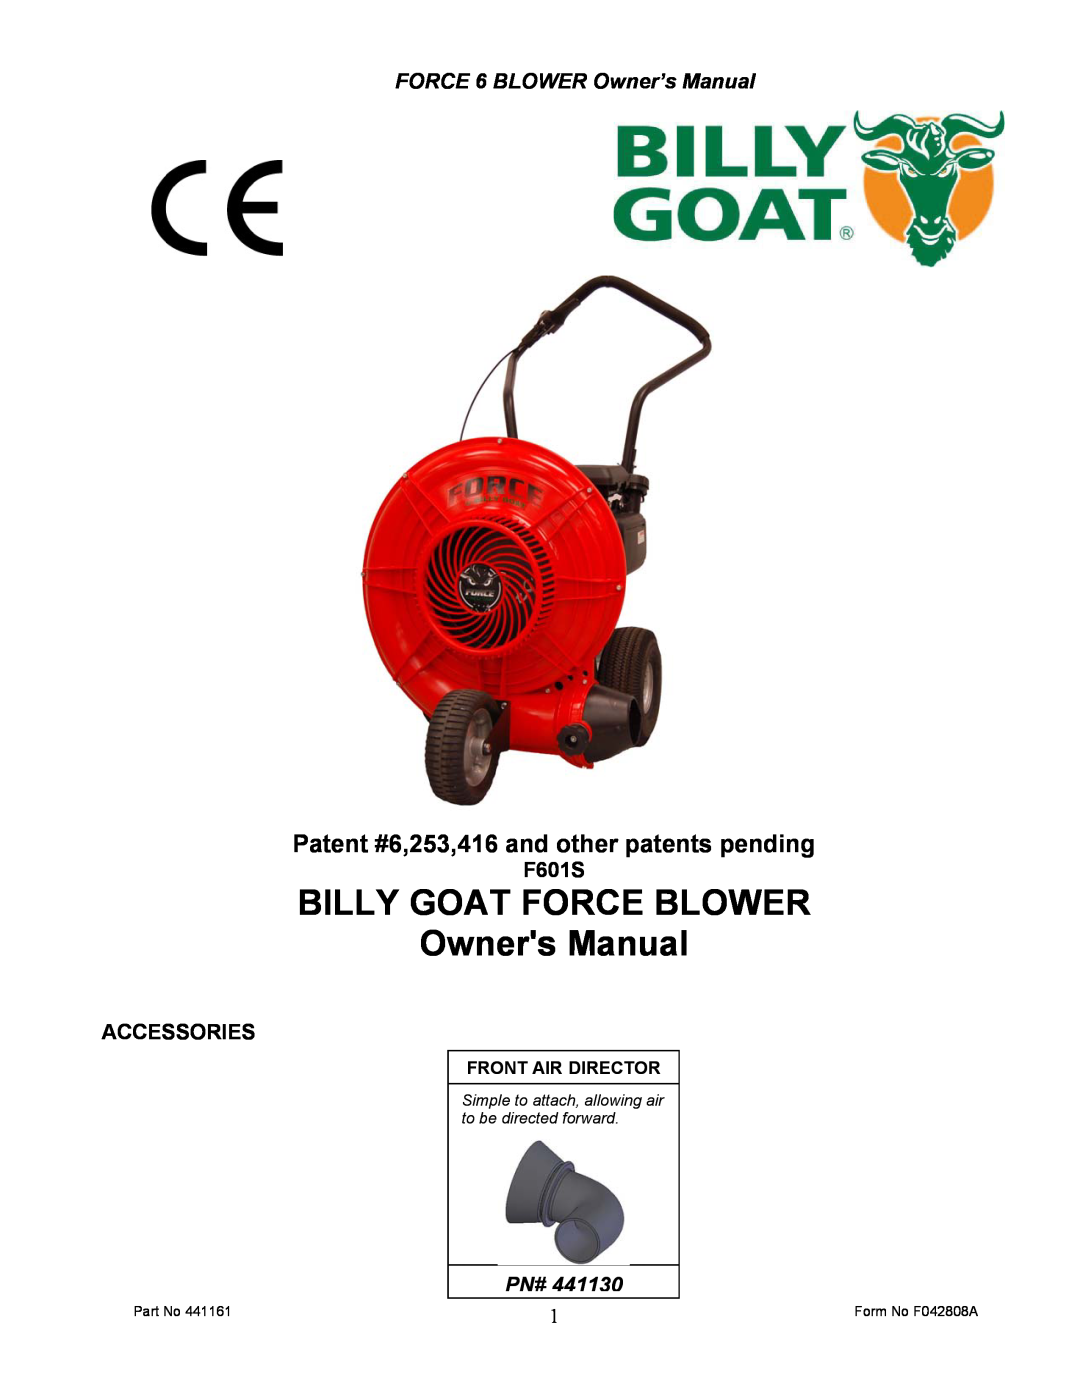 Billy Goat EX17D50012 owner manual Patent #6,253,416 and other patents pending, F601S, Accessories, Front Air Director 